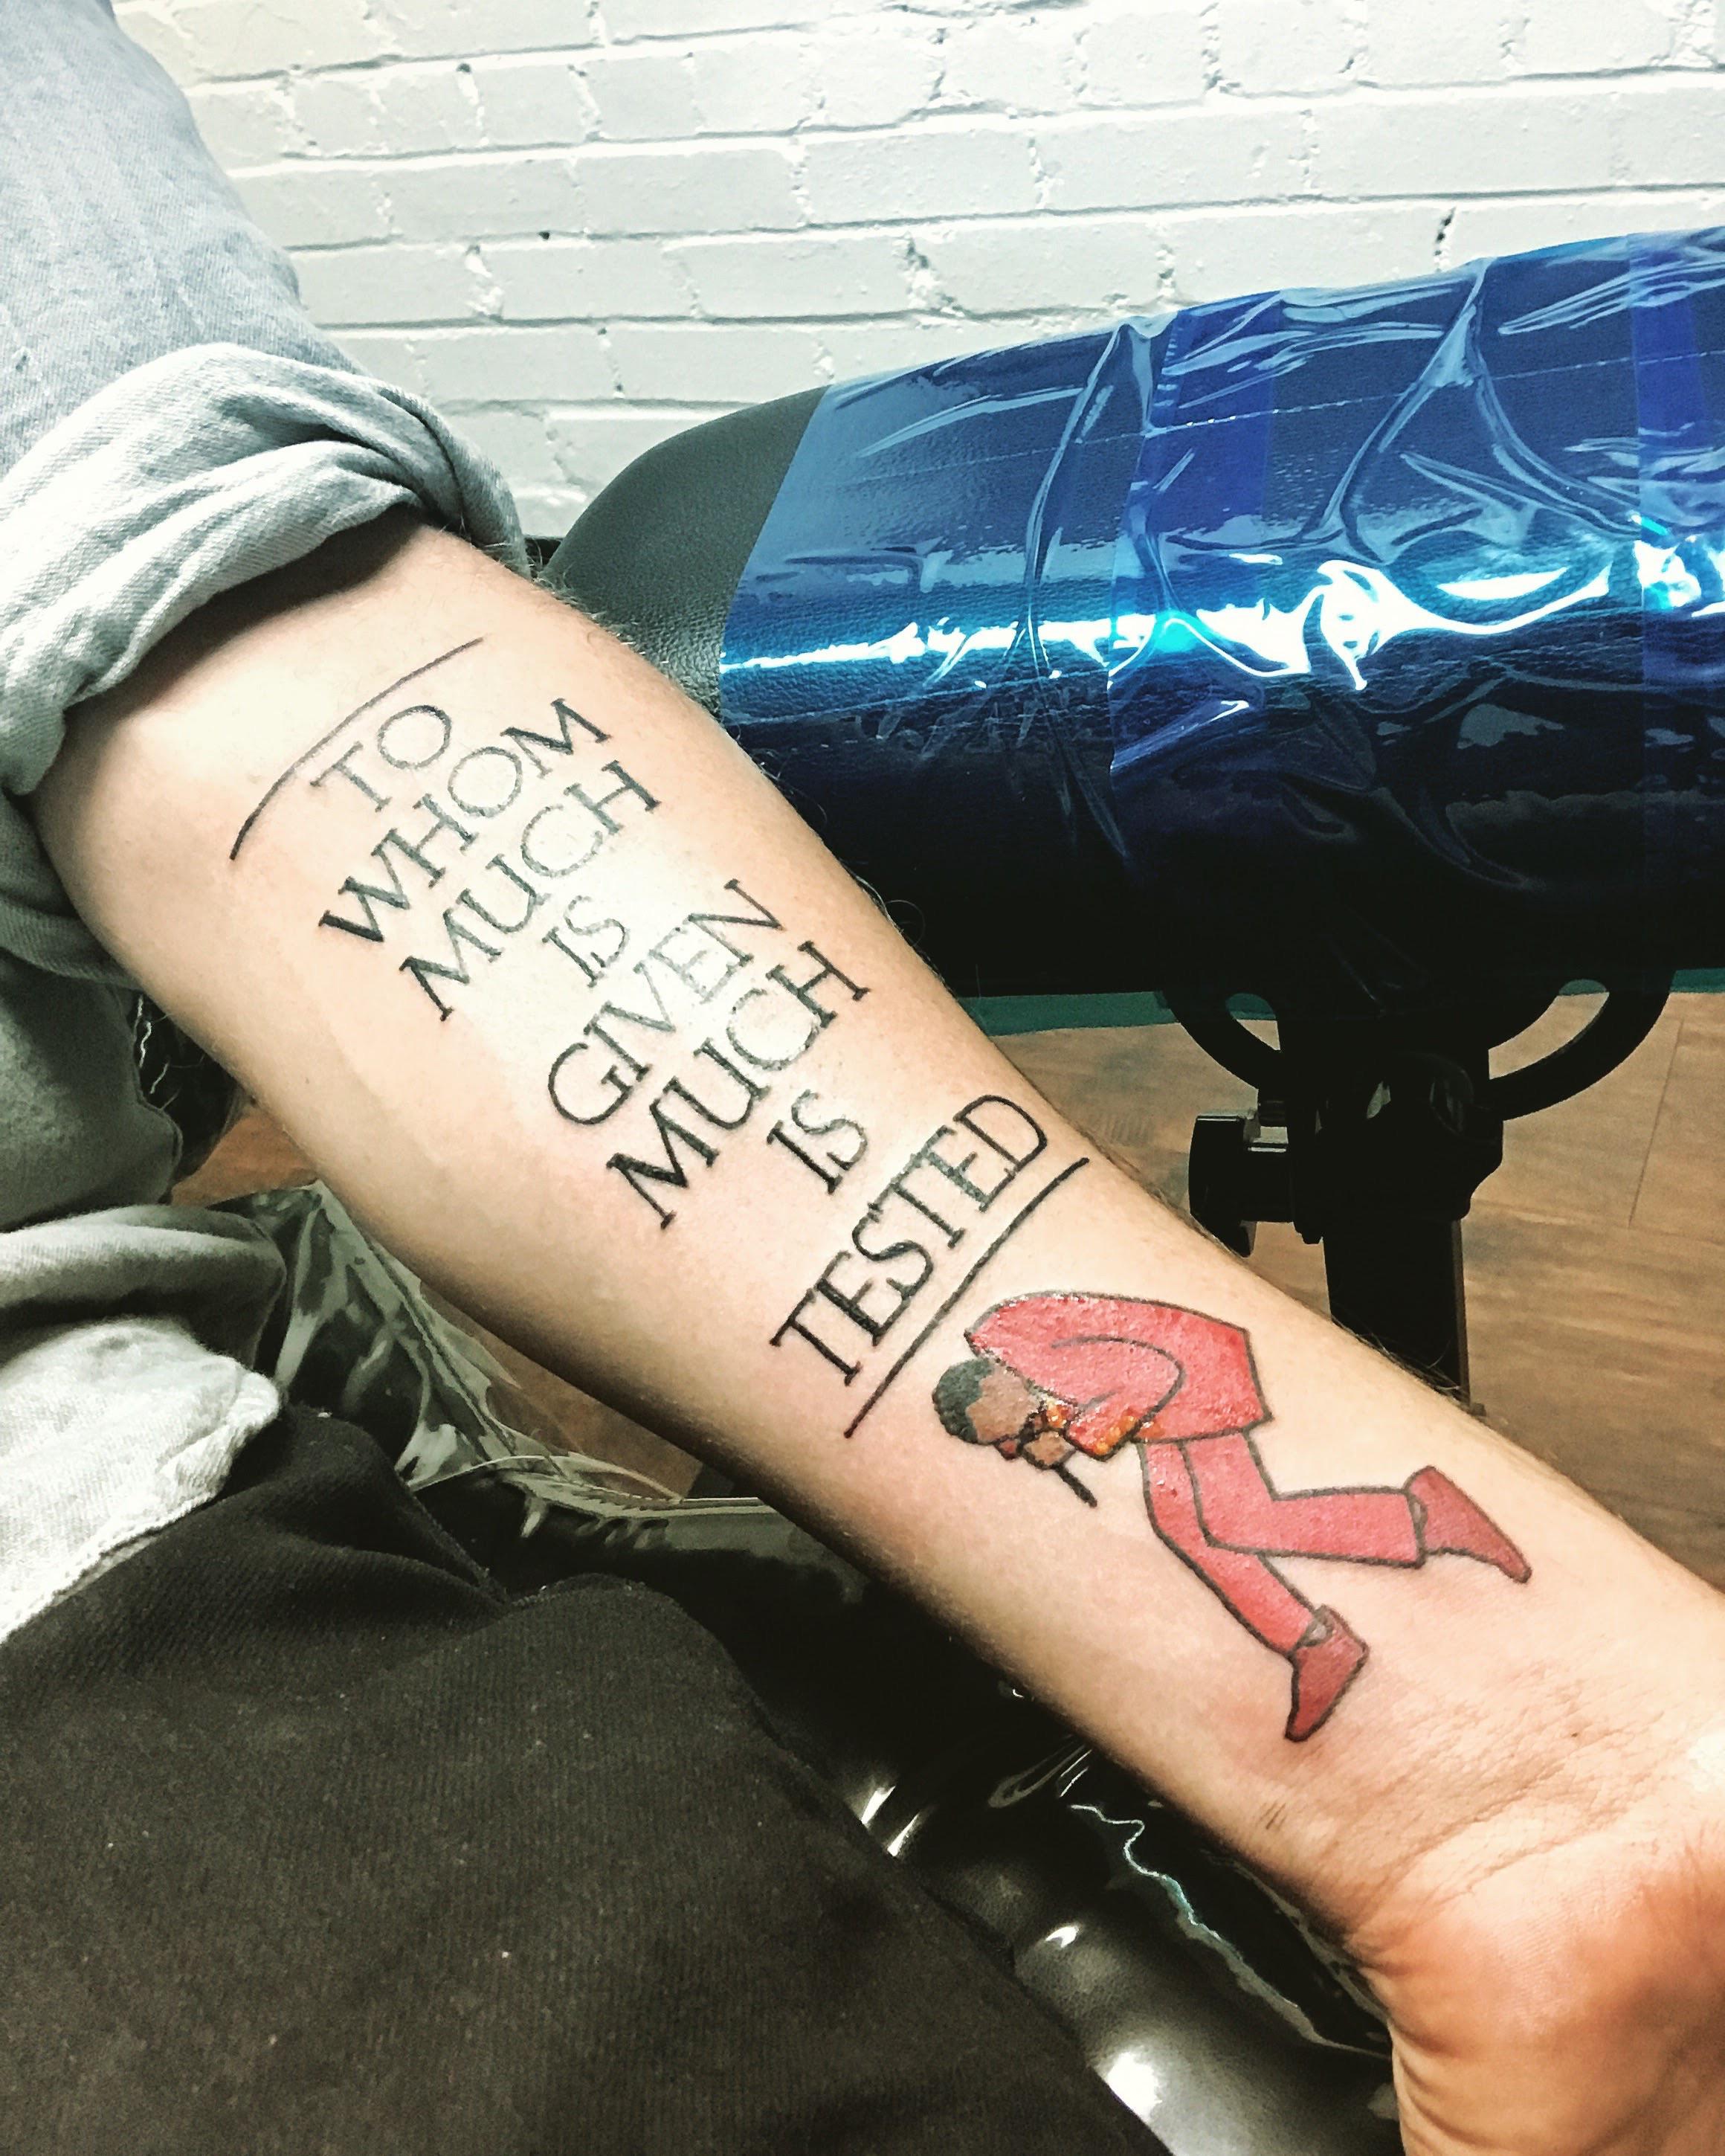 Thought you guys might like my MBDTF inspired tattoo  rKanye